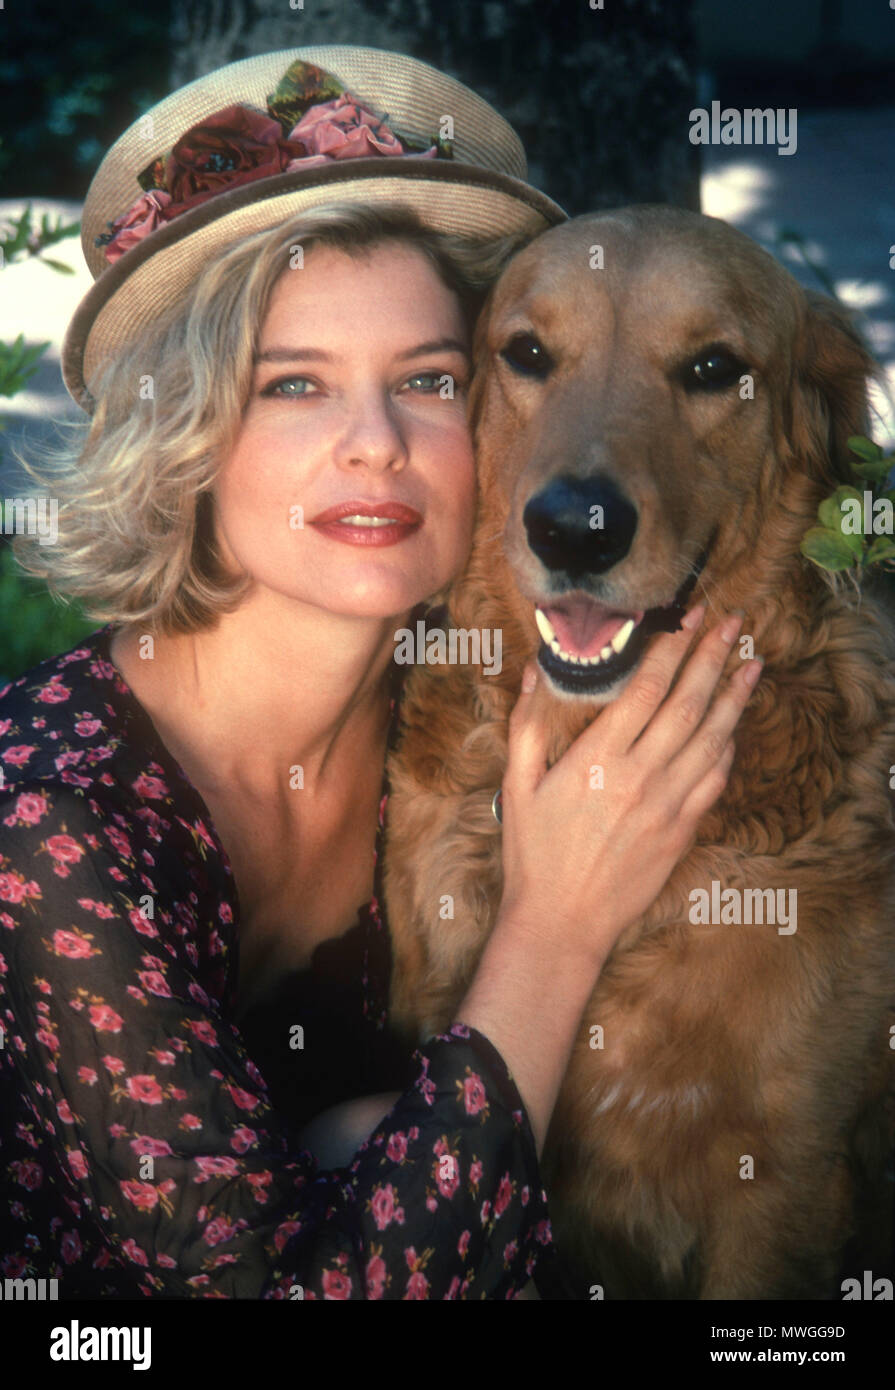 LOS ANGELES, CA- JULY 11: (EXCLUSIVE) Actress Kate Vernon poses with her dog at a photo shoot on July 11, 1991 in Los Angeles, California. Photo by Barry King/Alamy Stock Photo Stock Photo